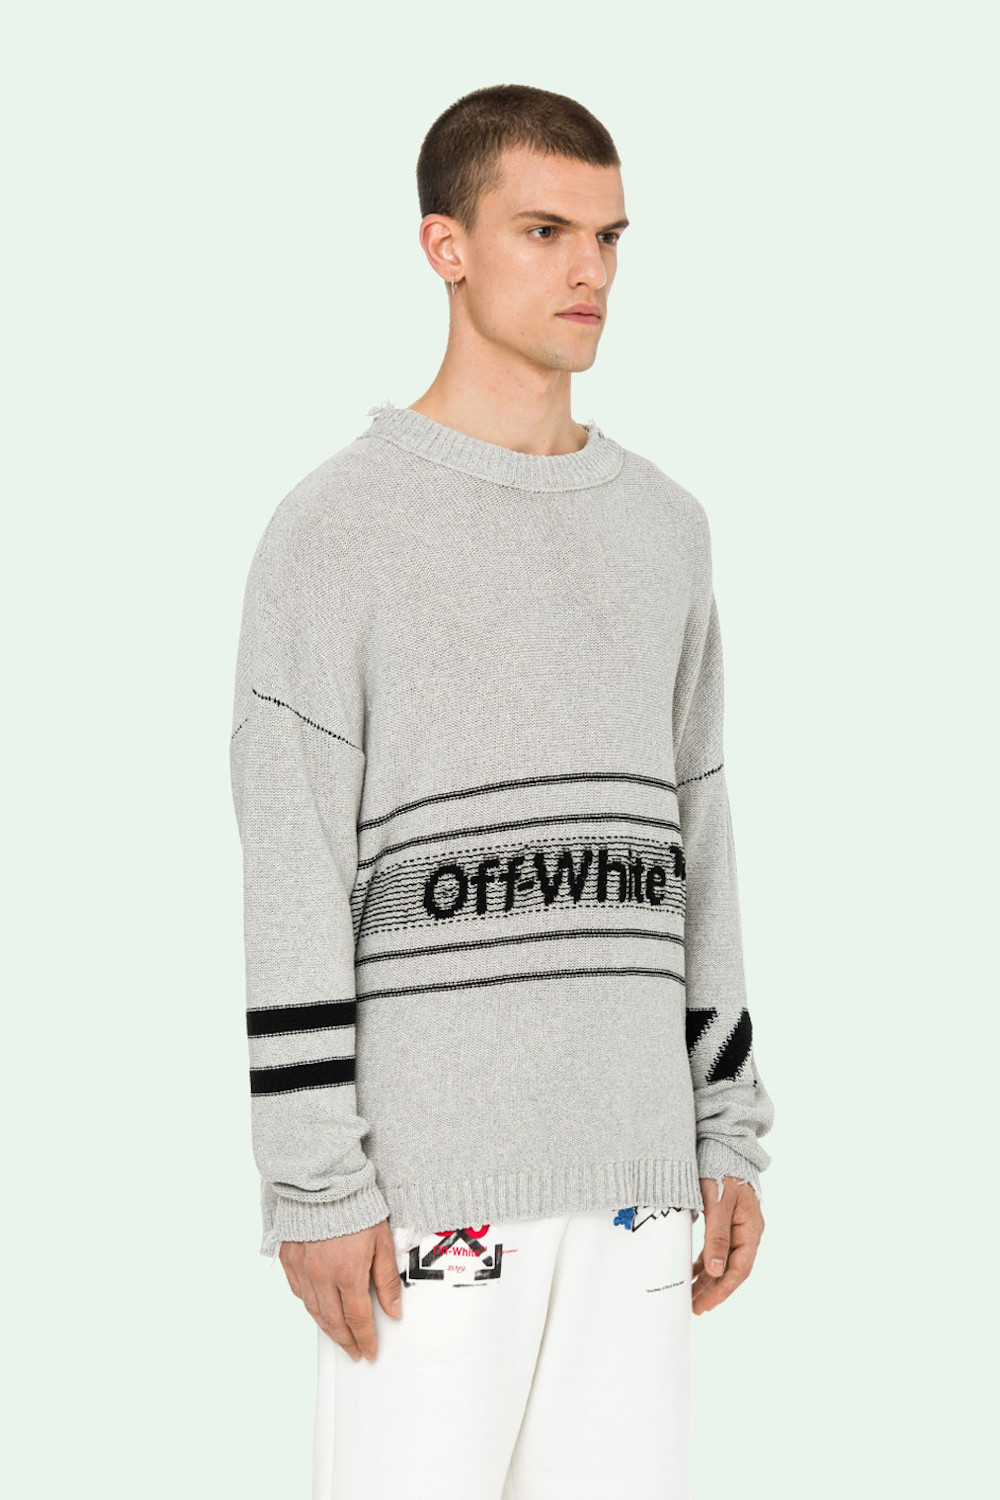 Off-White’s Spring/Summer 2019 is Available for Pre-Order